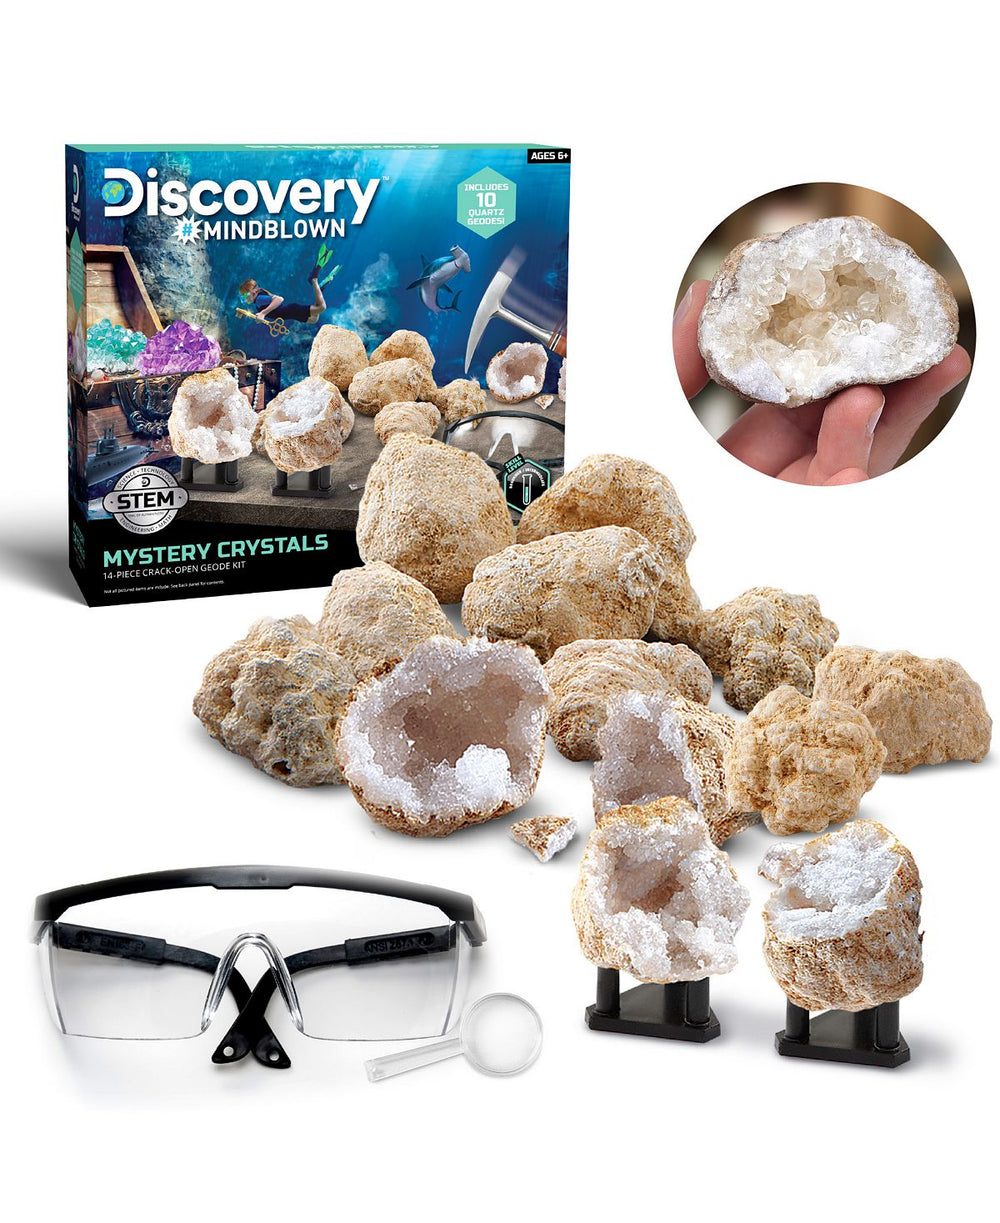 Discovery #MINDBLOWN Geode Crystal Excavation Science Kit